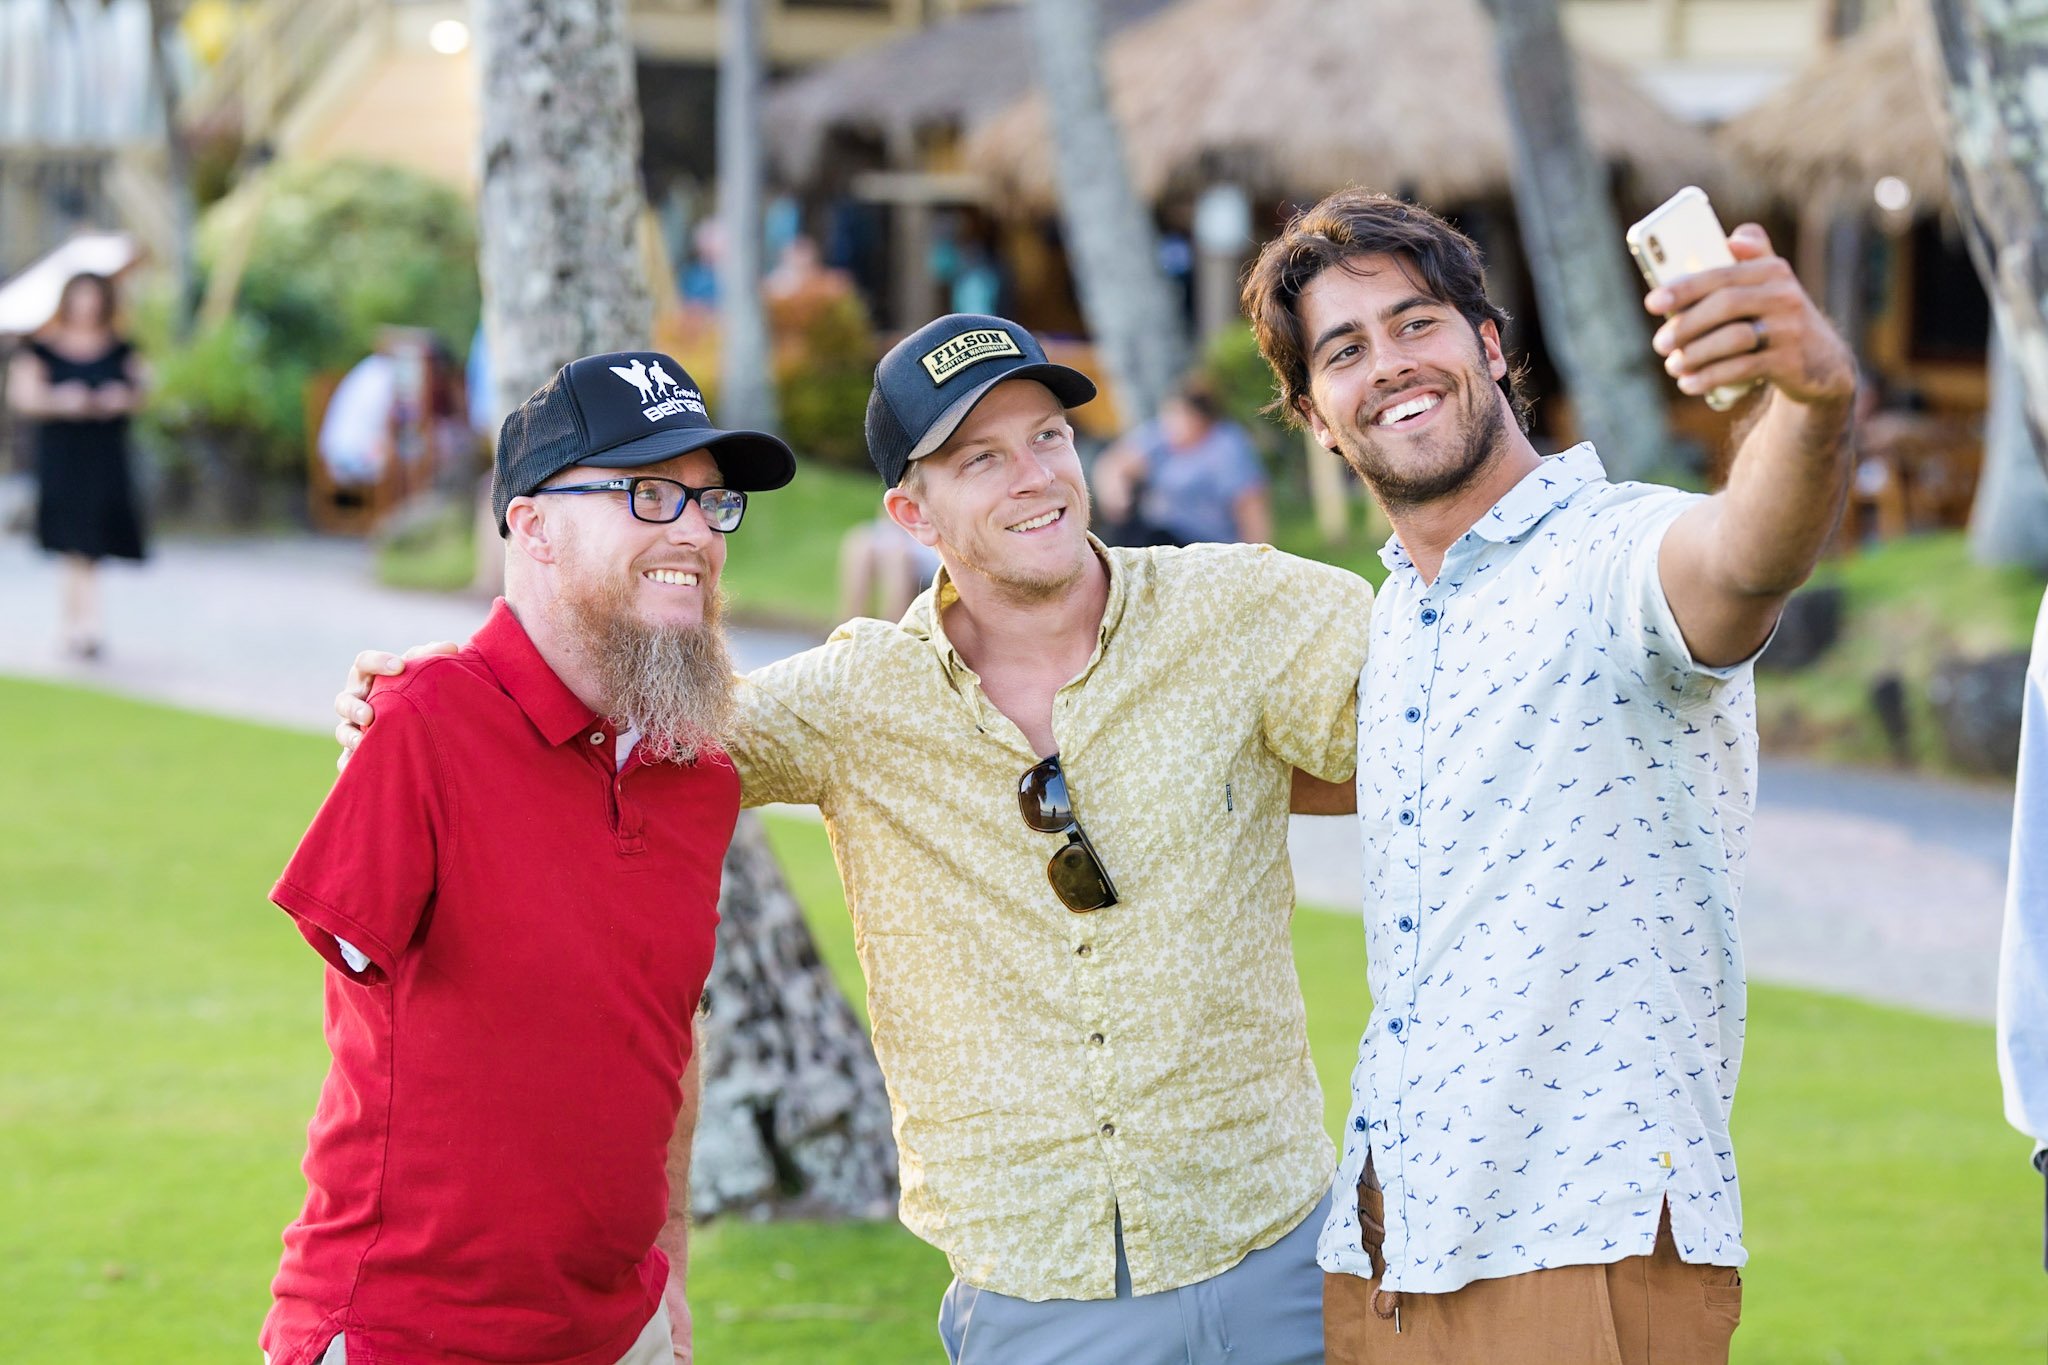 Shane and two other Forge men gather together for a selfie outside before dinner at Duke's Kauai.